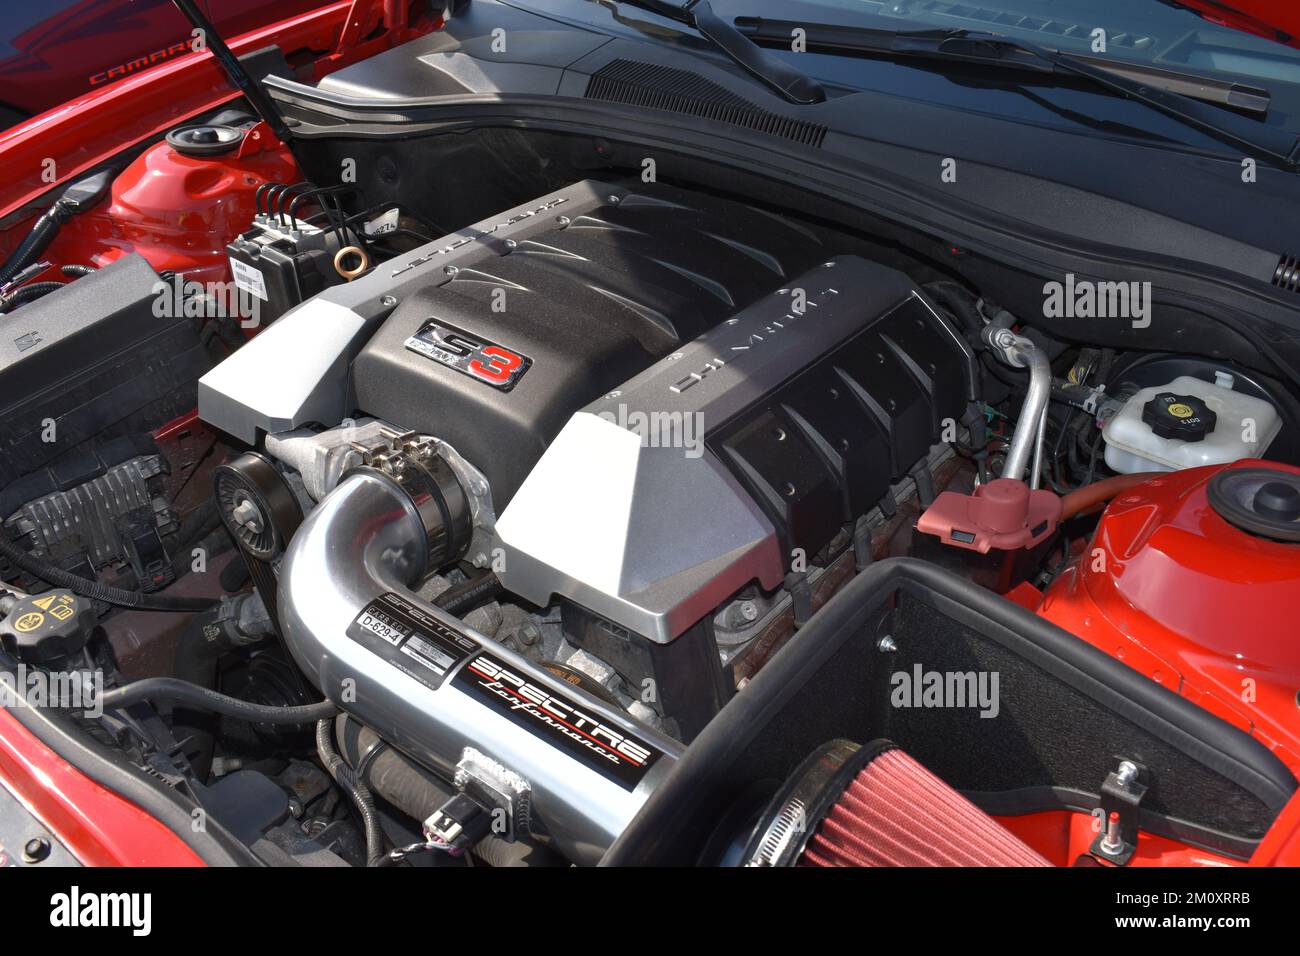 A LS3 Chevrolet Engine in a Camaro at a car show. Stock Photo